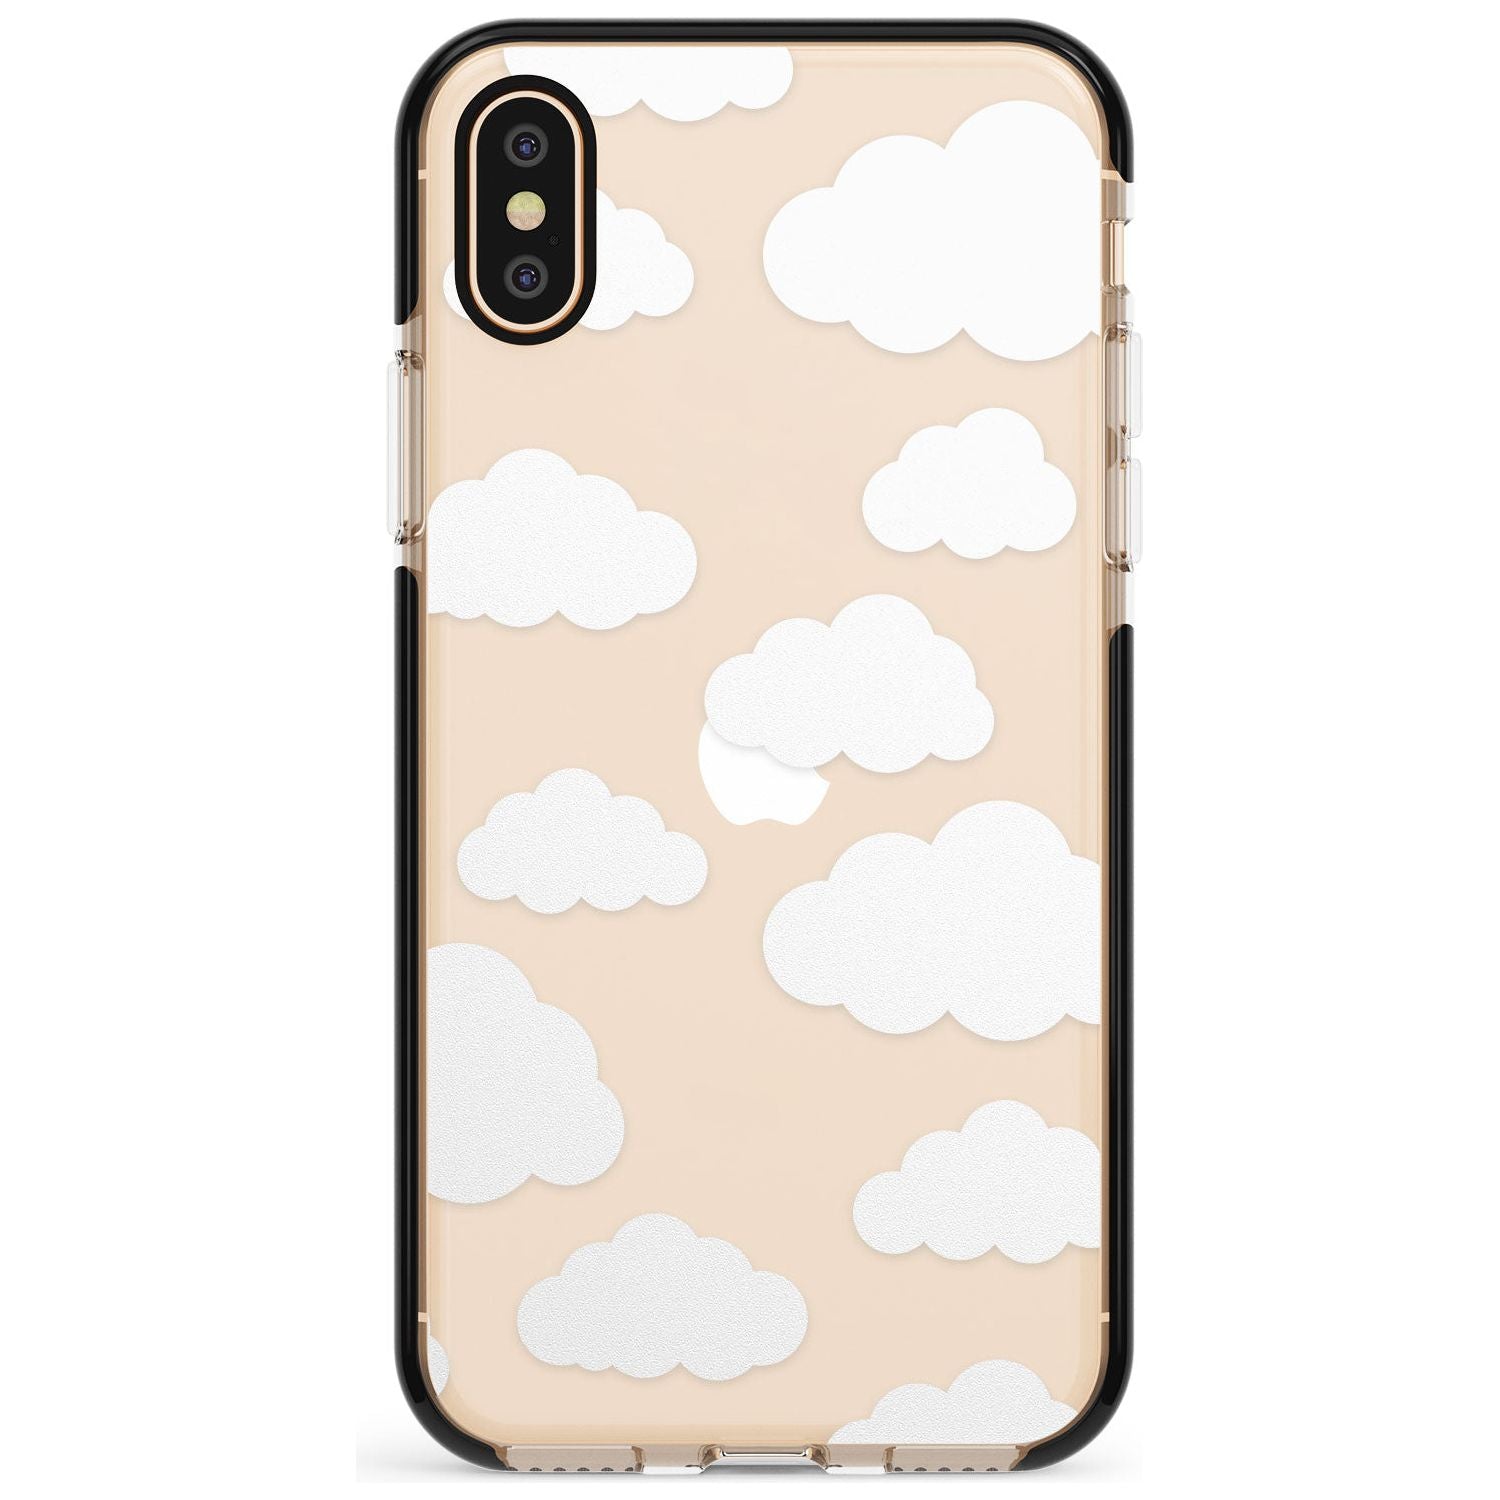 Transparent Cloud Pattern Pink Fade Impact Phone Case for iPhone X XS Max XR